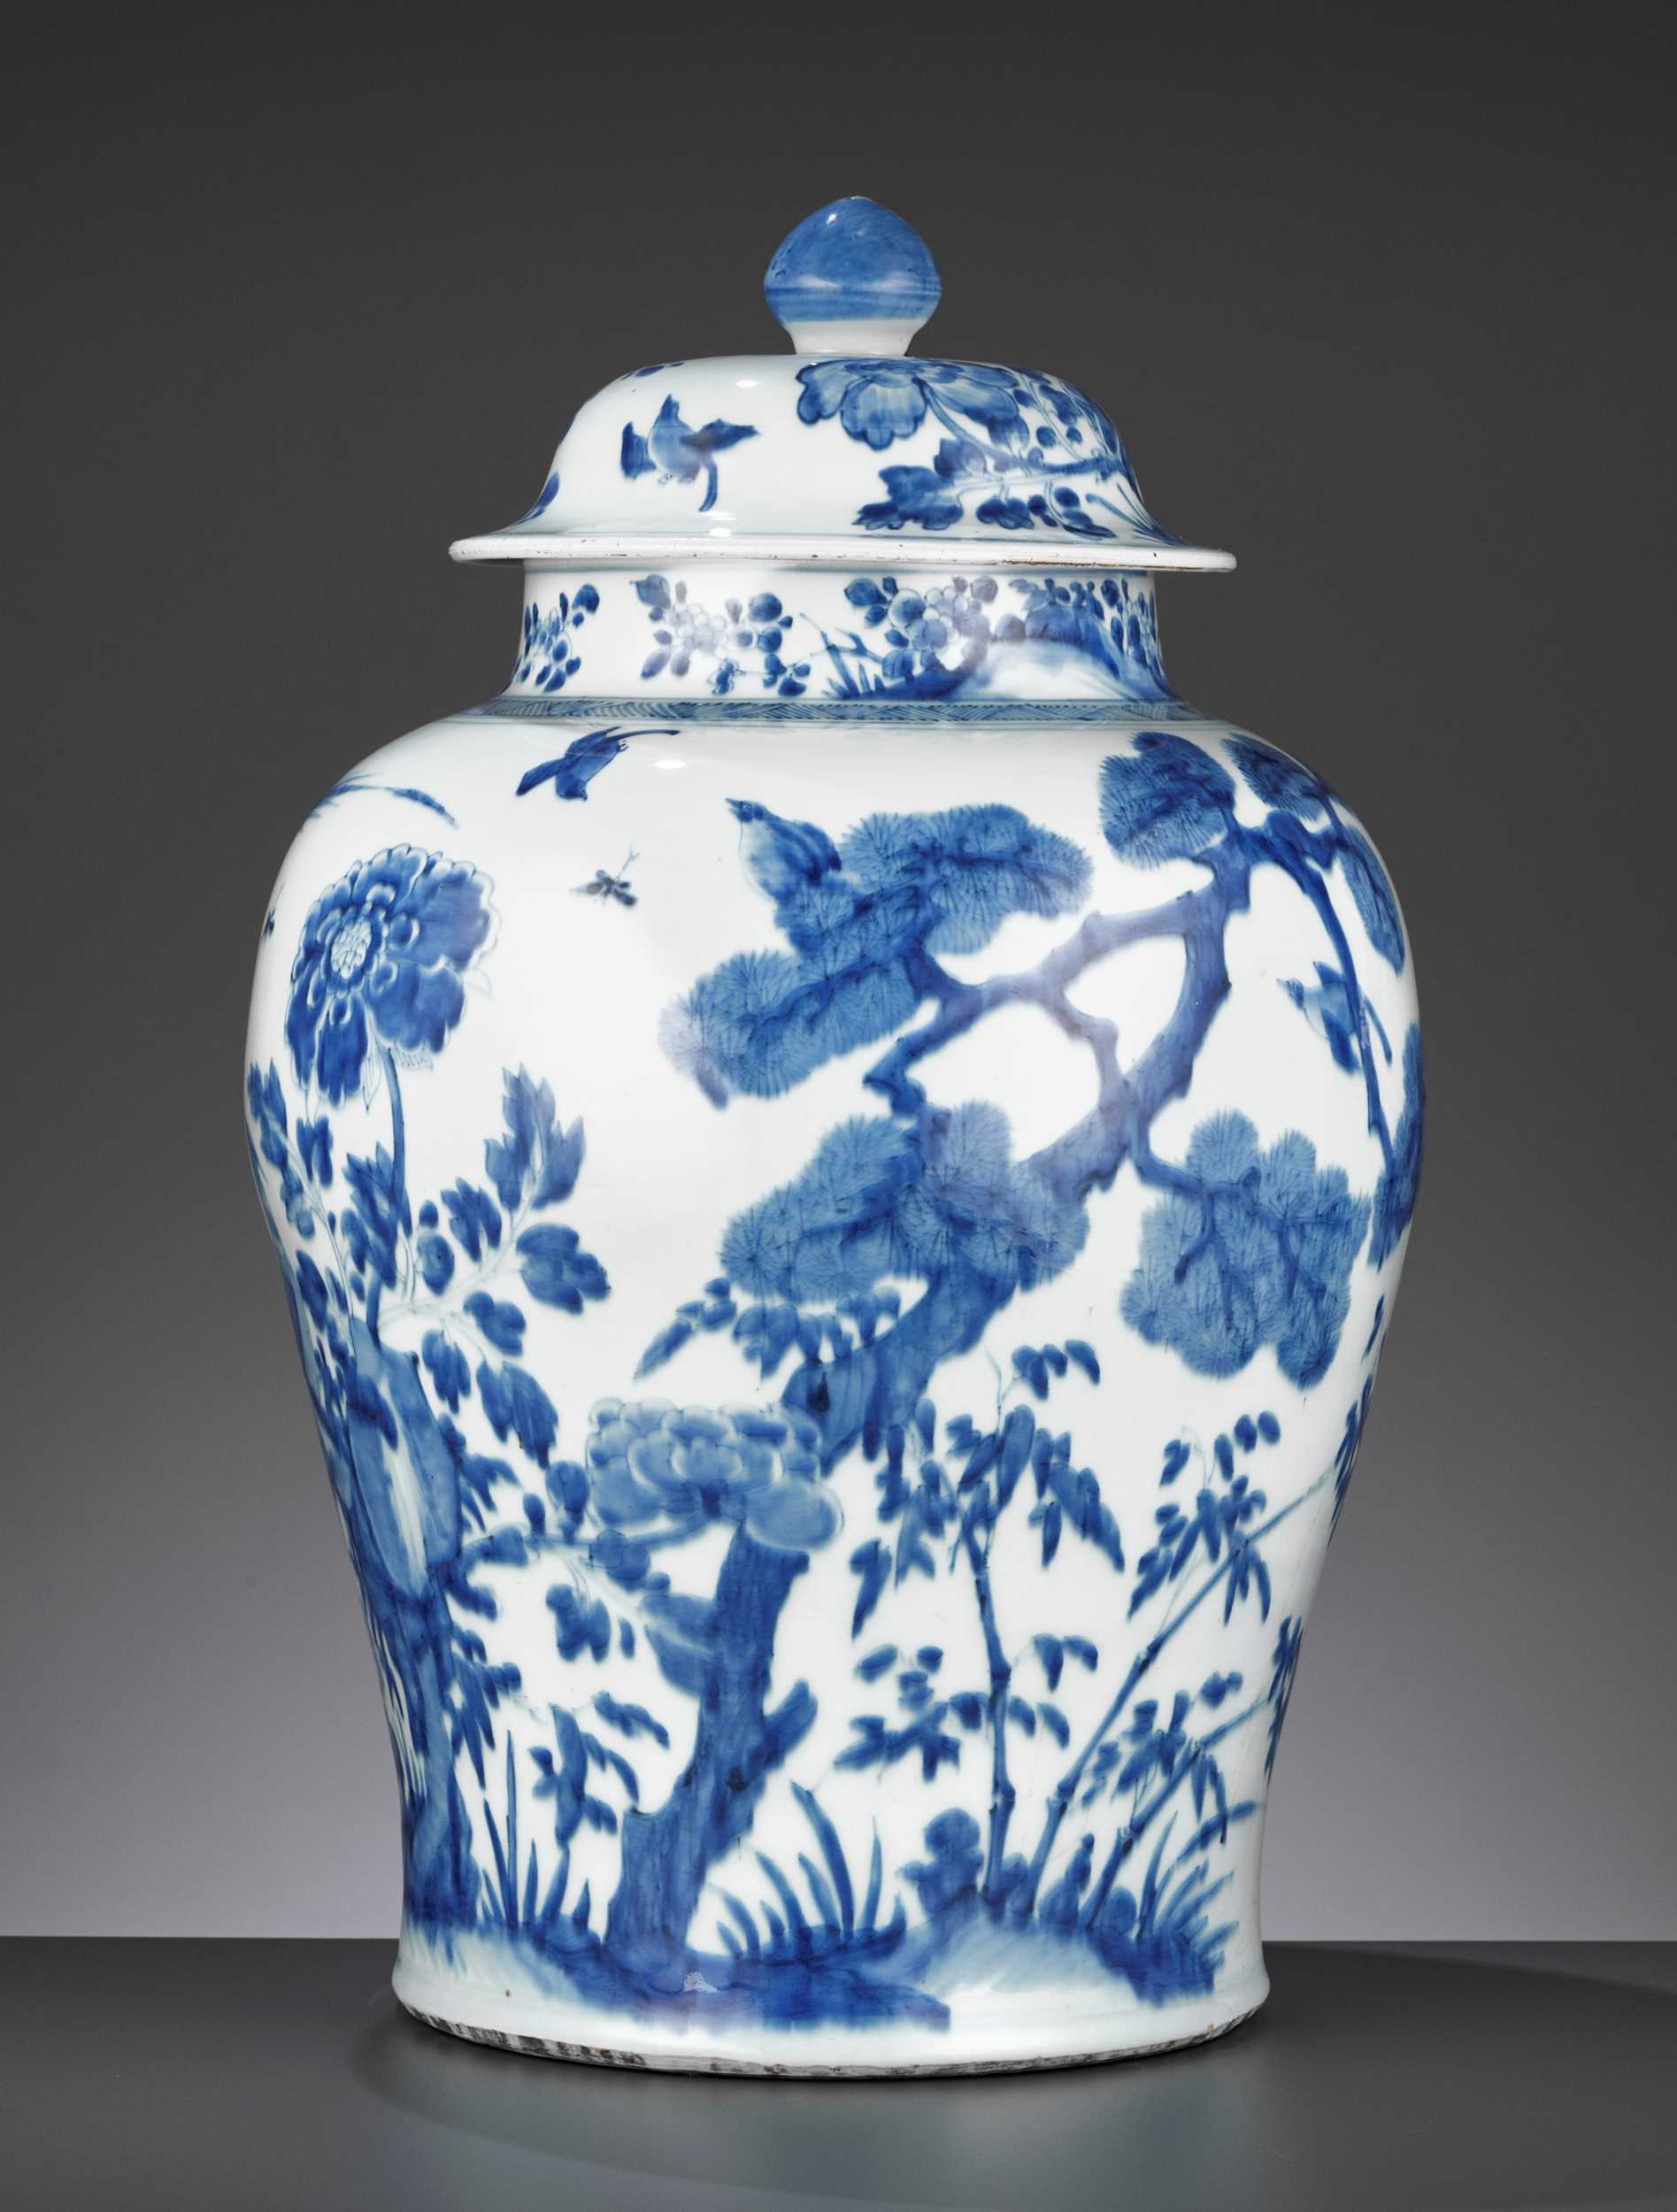 Lot 213 - A LARGE BLUE AND WHITE ‘THREE FRIENDS OF WINTER’ BALUSTER JAR AND COVER, KANGXI PERIOD